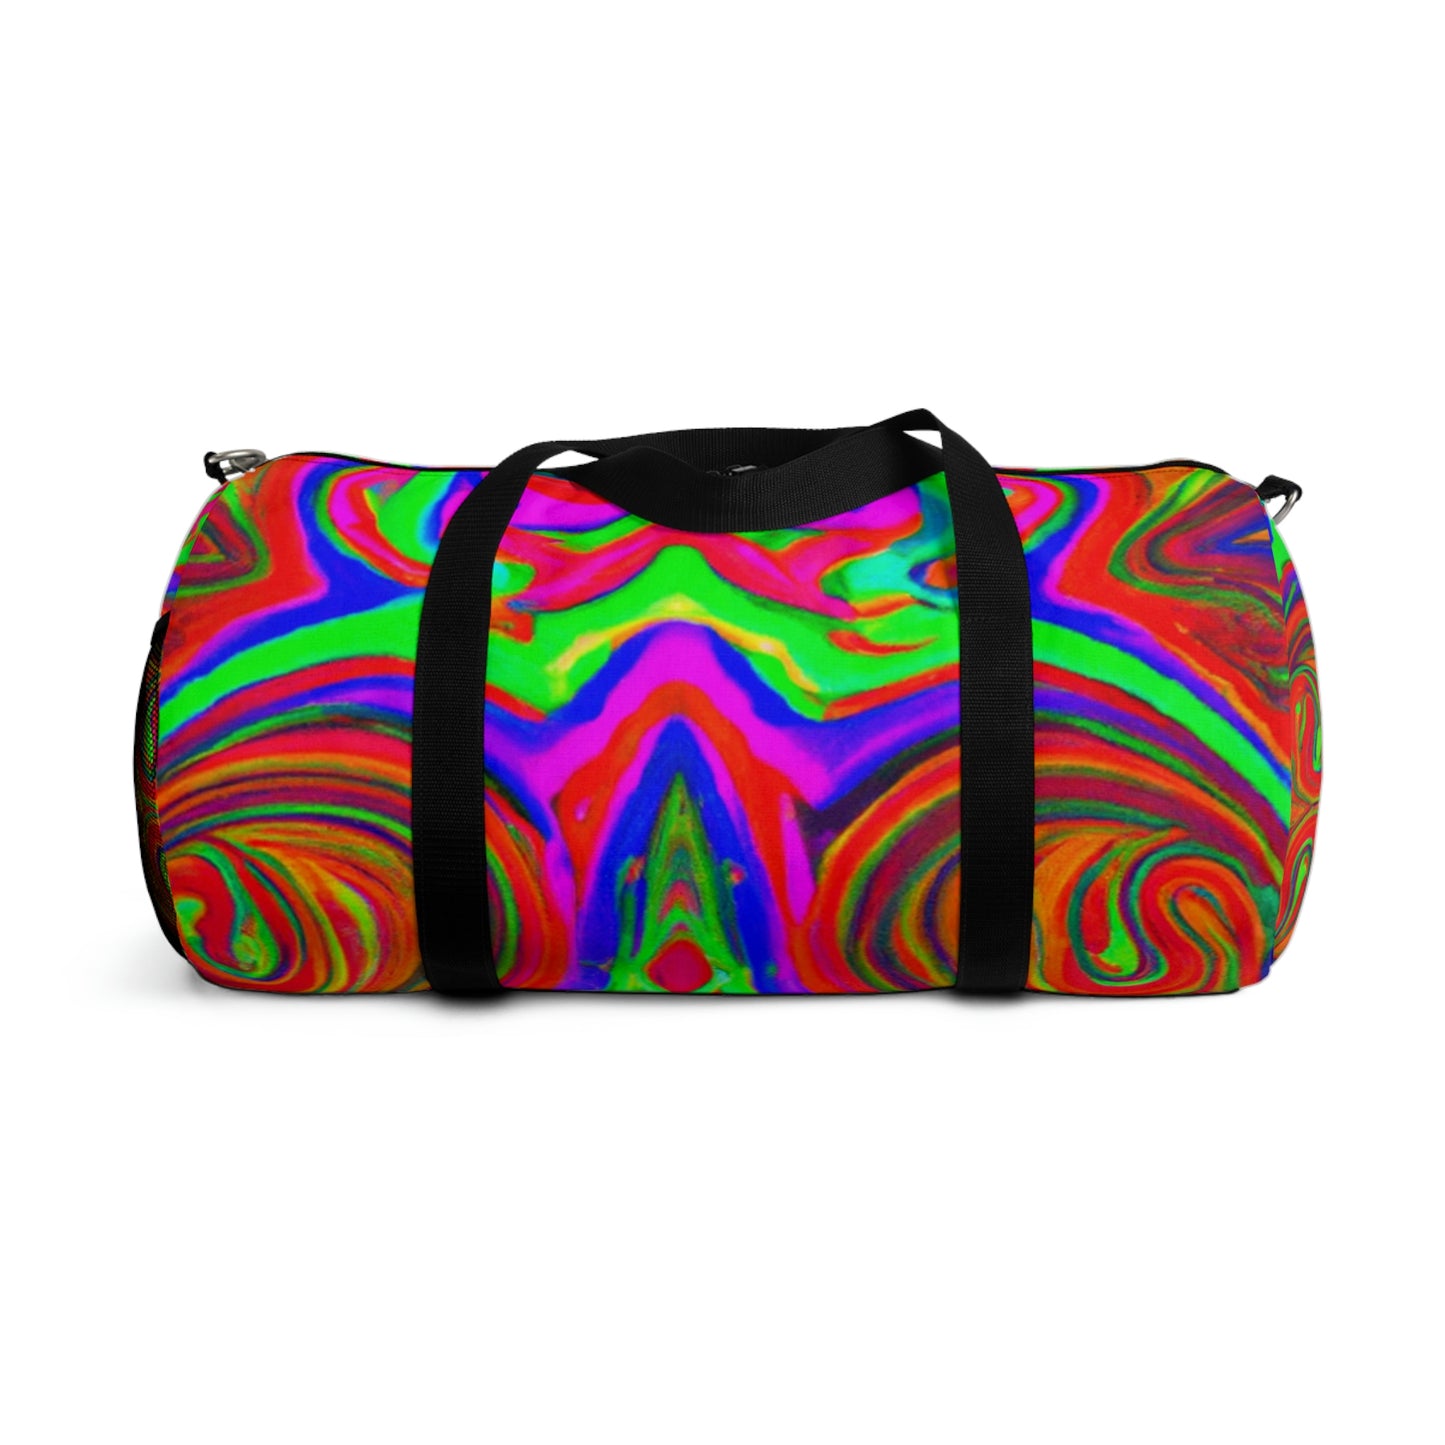 Cecilio Couture - Psychedelic Duffel Bag